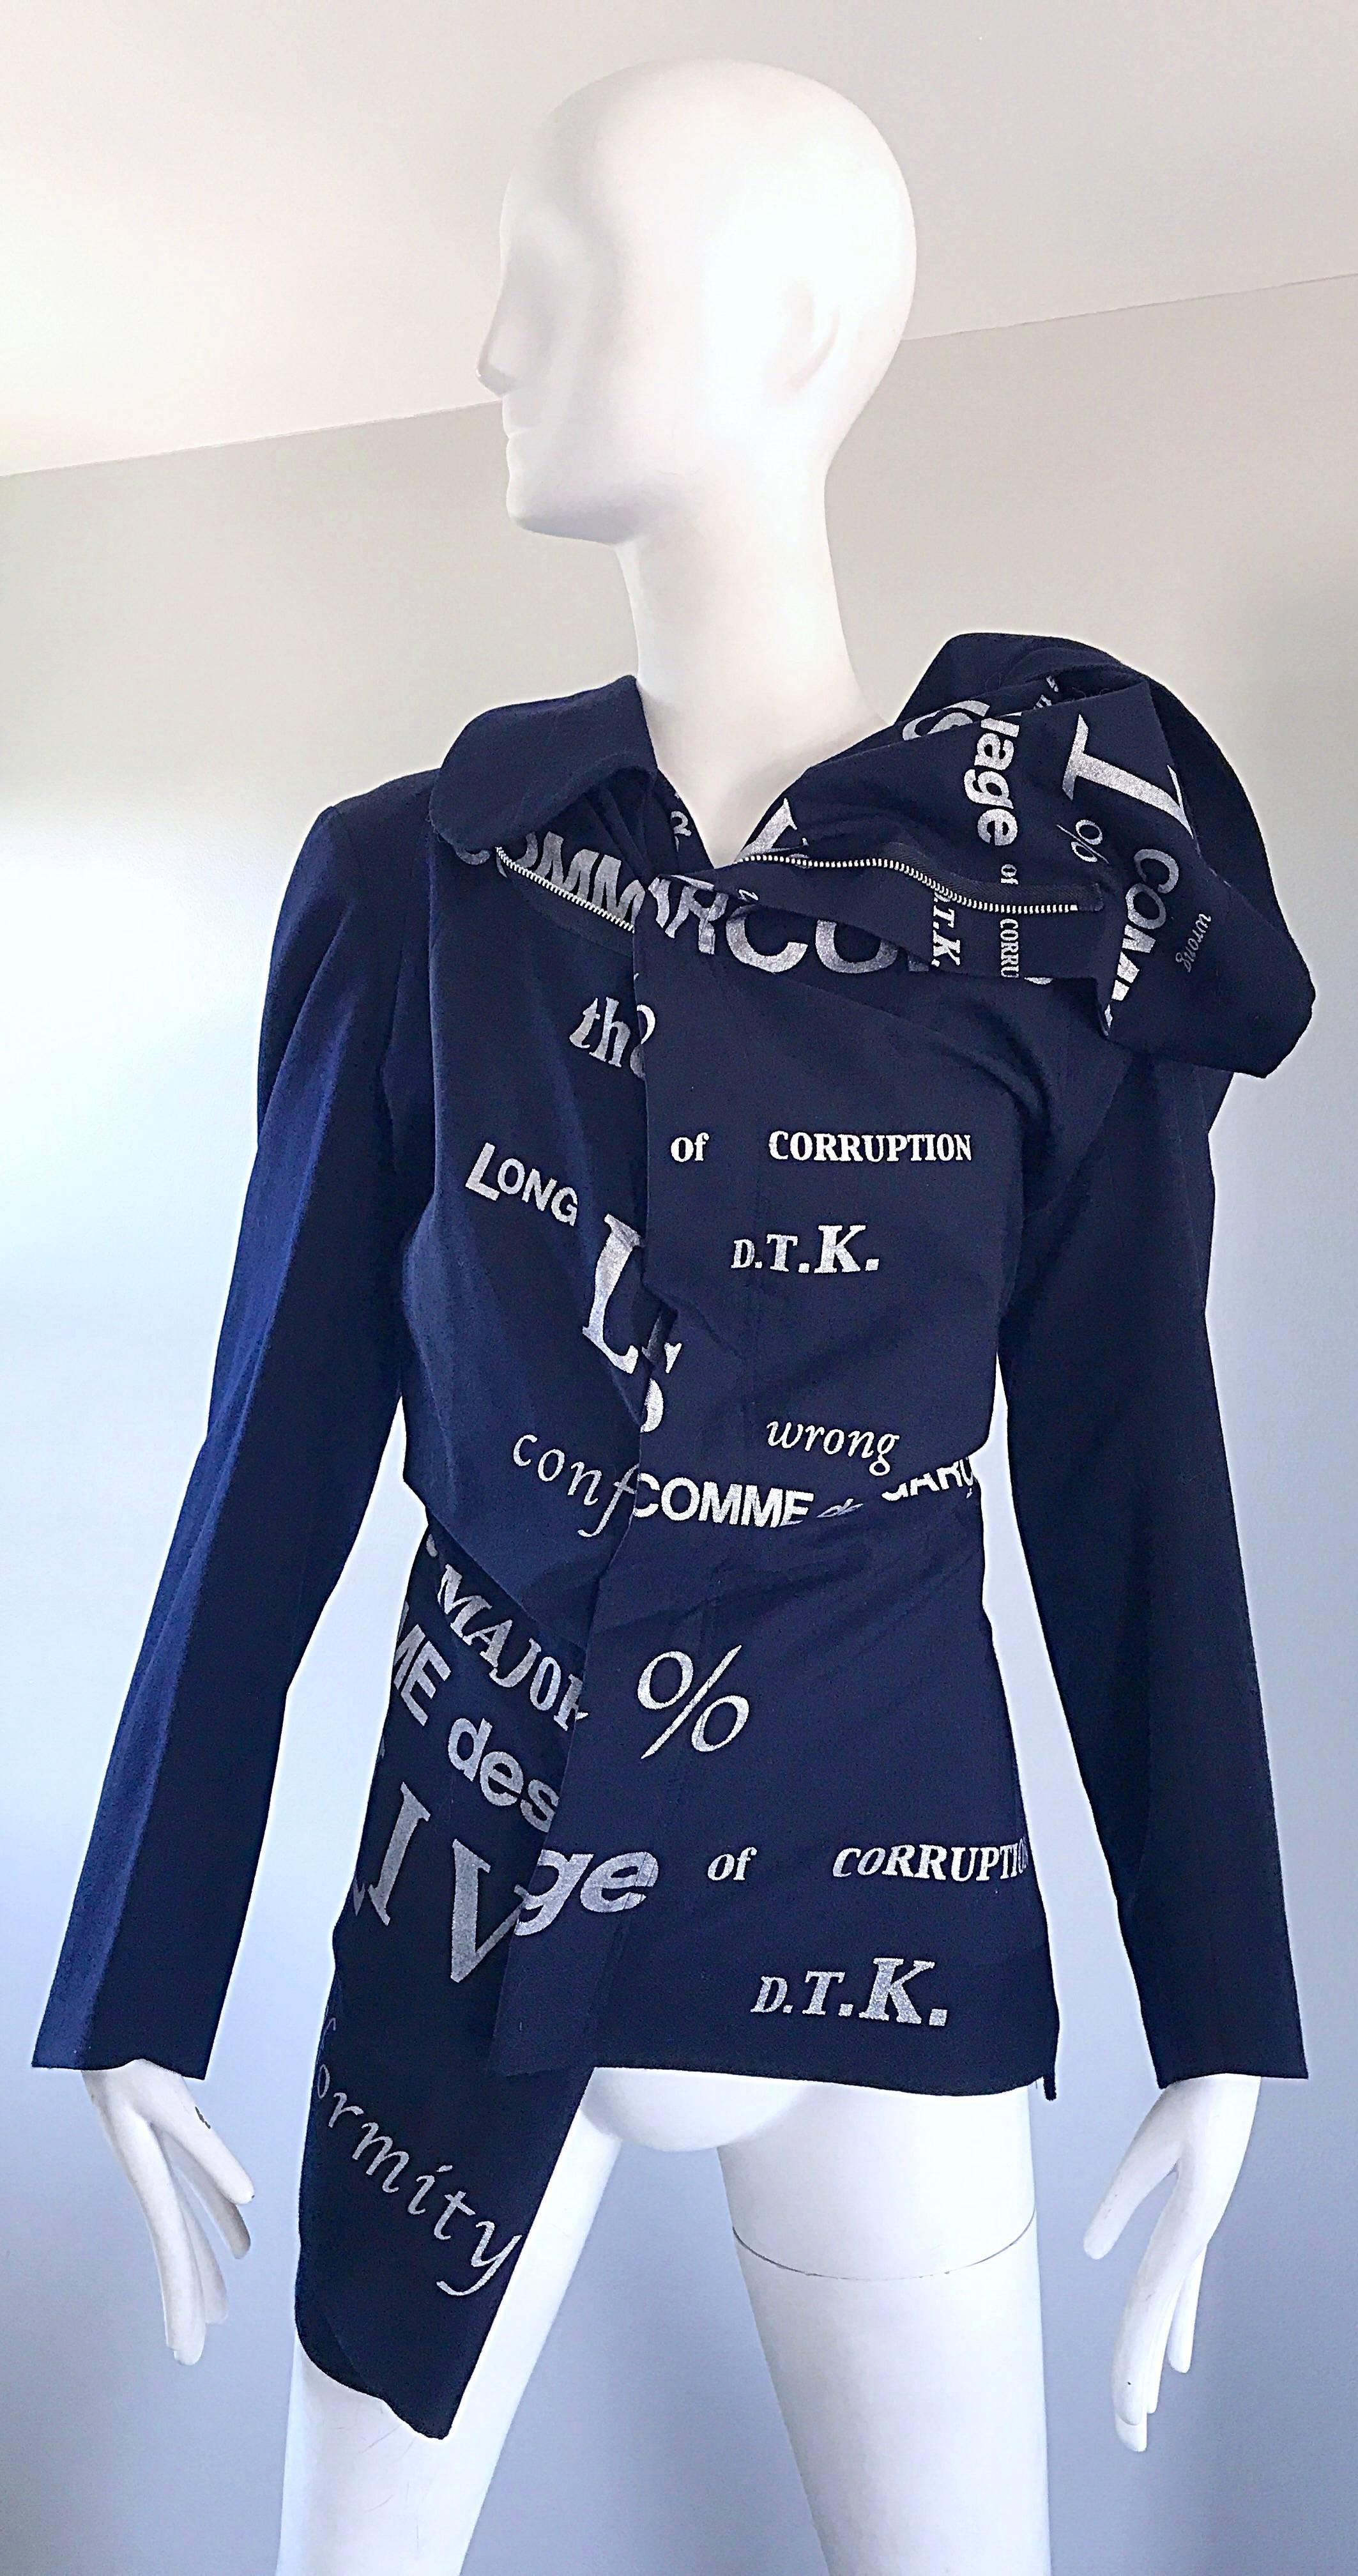 Amazing and super rare COMME DES GARCONS Fall '03 Runway navy blue and silver metallic graffiti 'Conformity + Corruption' asymmetrical wool jacket! This is one of my favorite pieces Rei Kawakubo ever produced! I once had the pants, and they sold